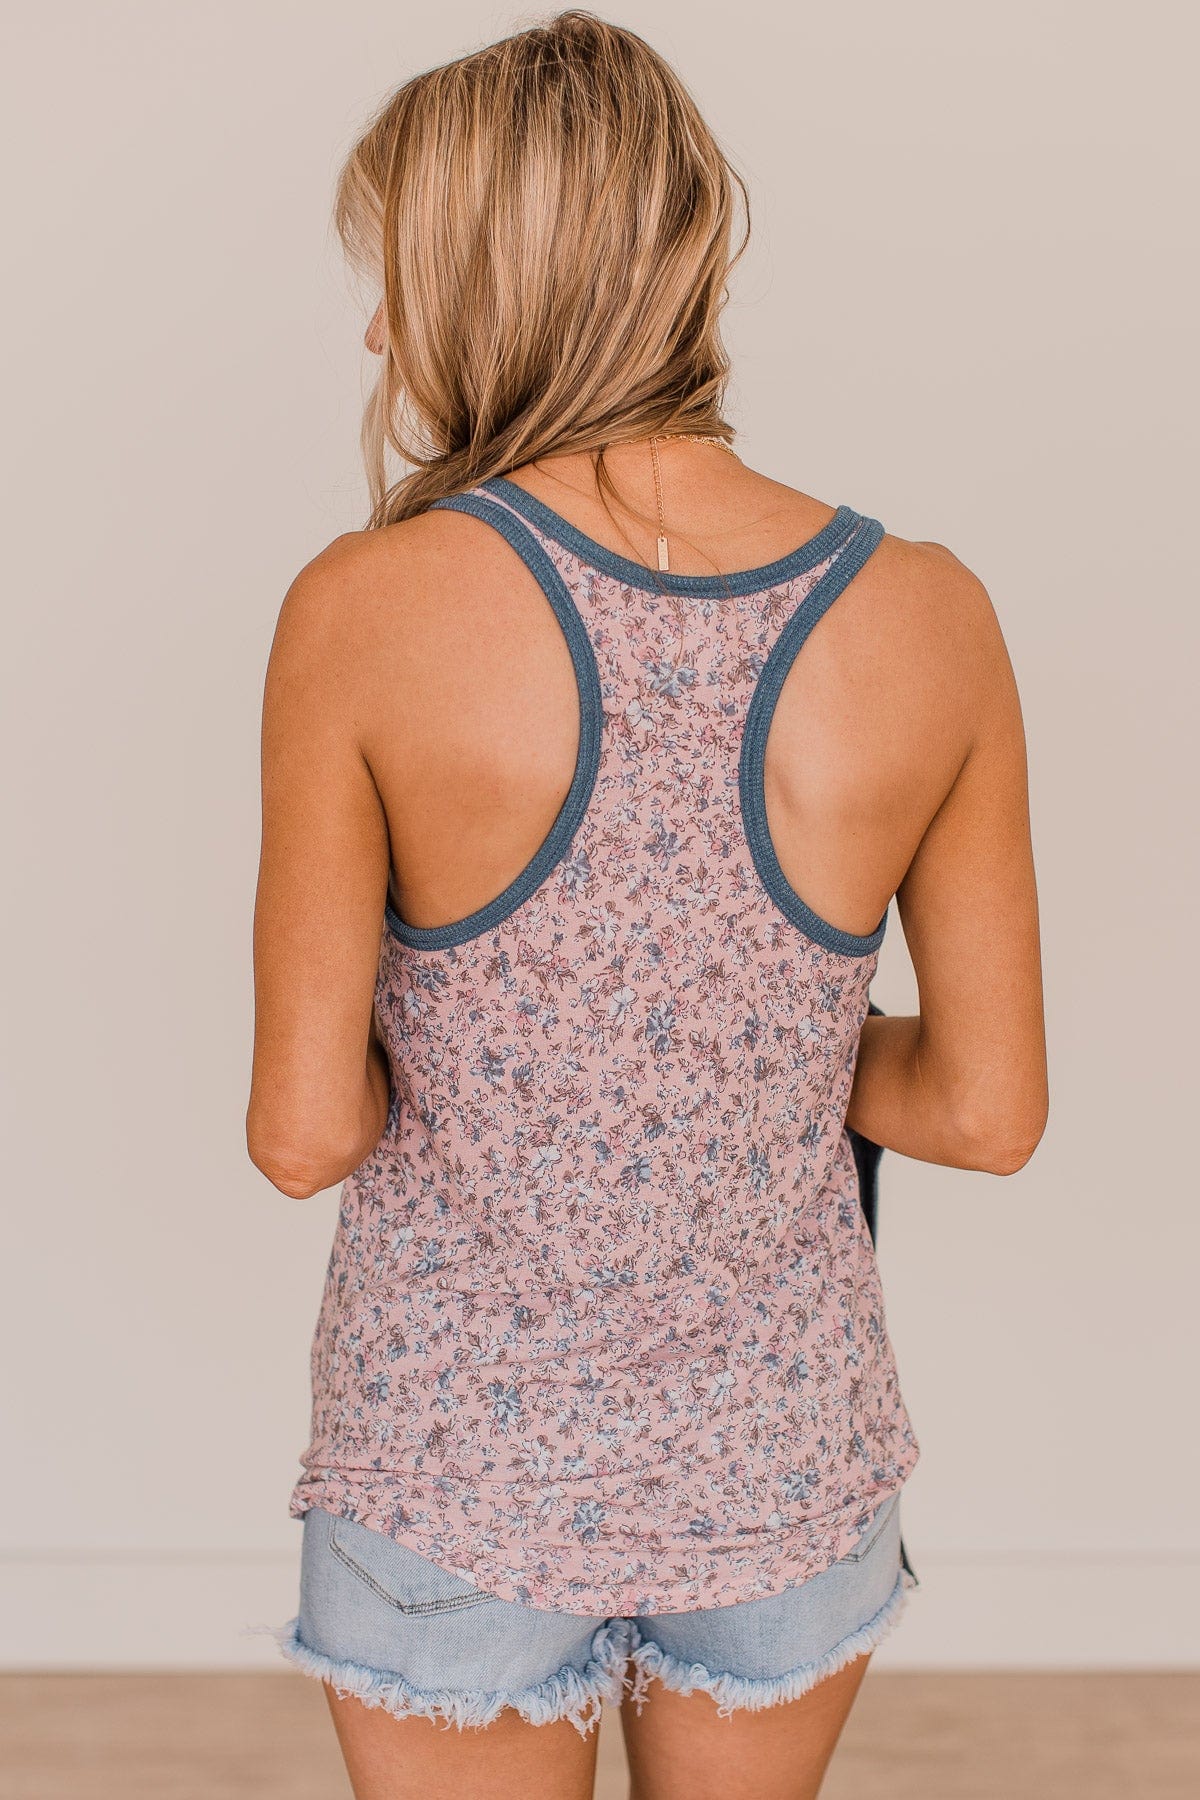 Make It My Own Floral Tank Top- Light Pink & Navy